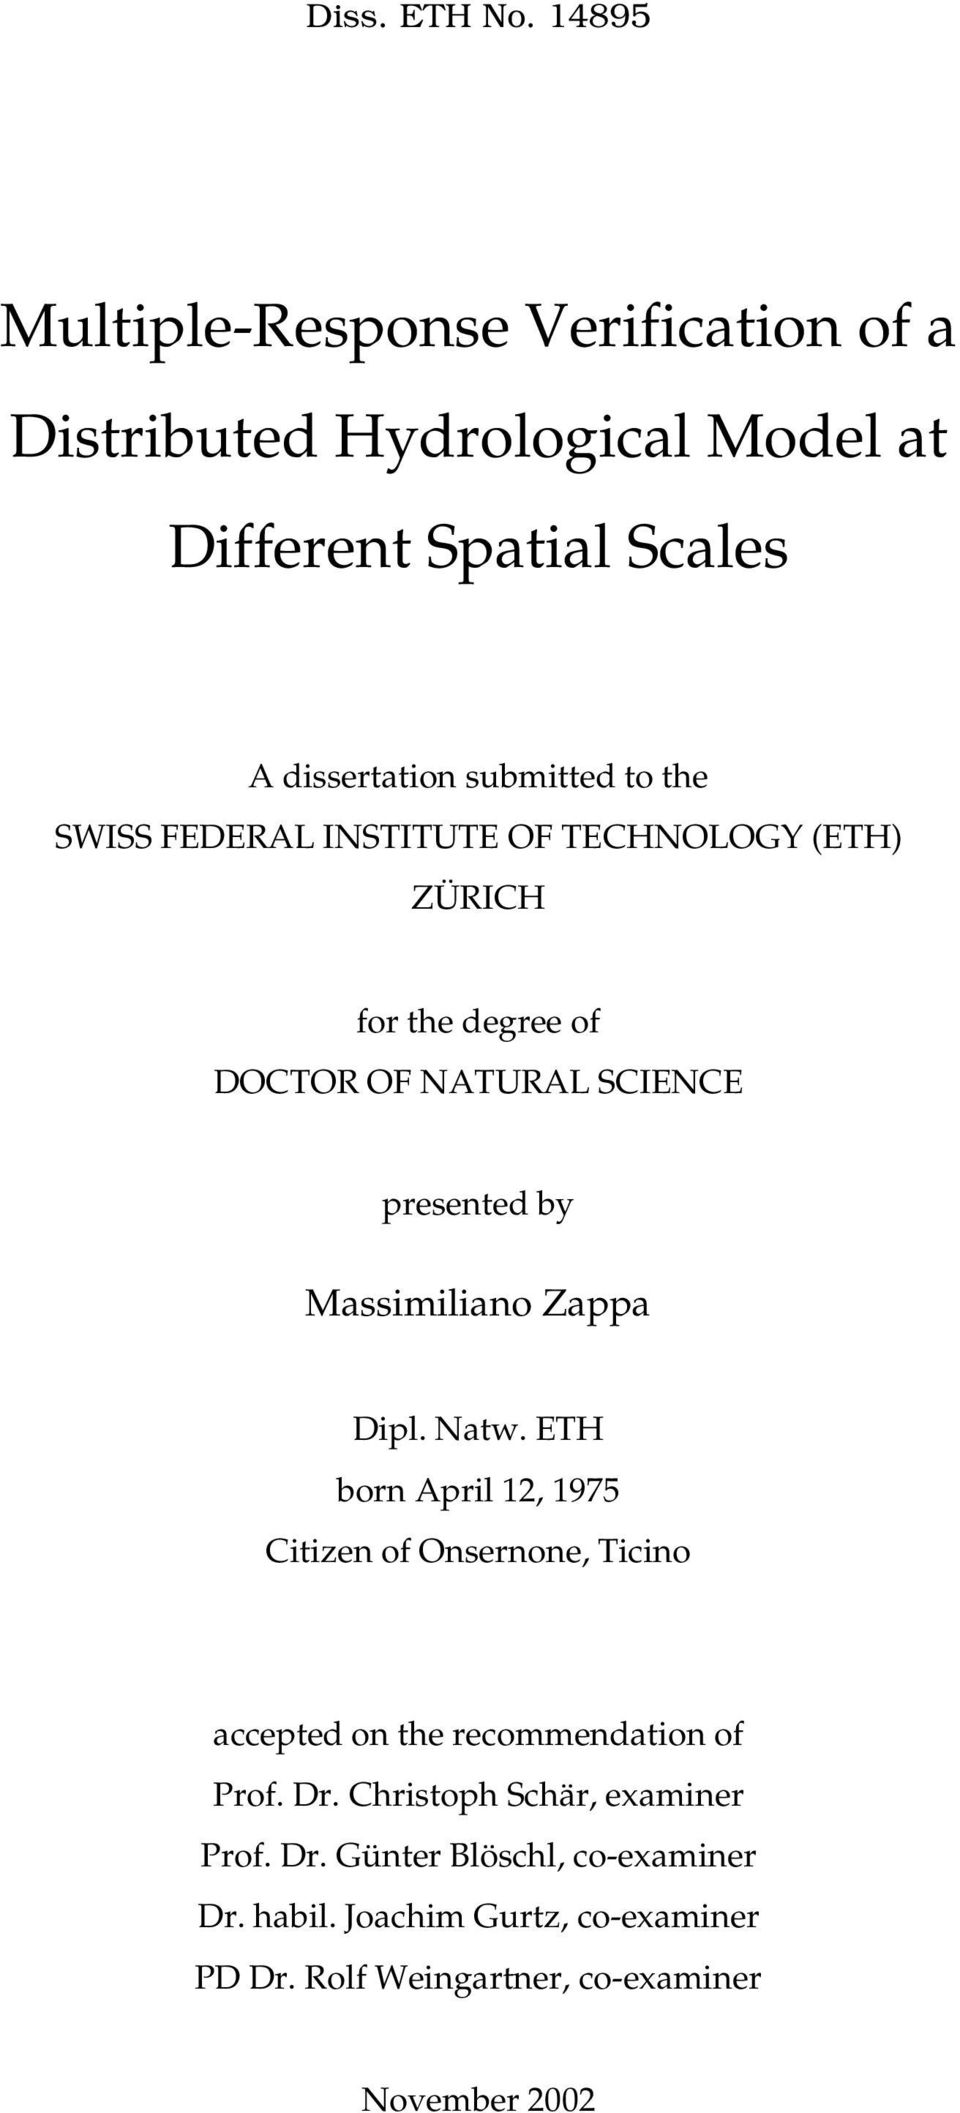 SWISS FEDERAL INSTITUTE OF TECHNOLOGY (ETH) ZÜRICH for the degree of DOCTOR OF NATURAL SCIENCE presented by Massimiliano Zappa Dipl.